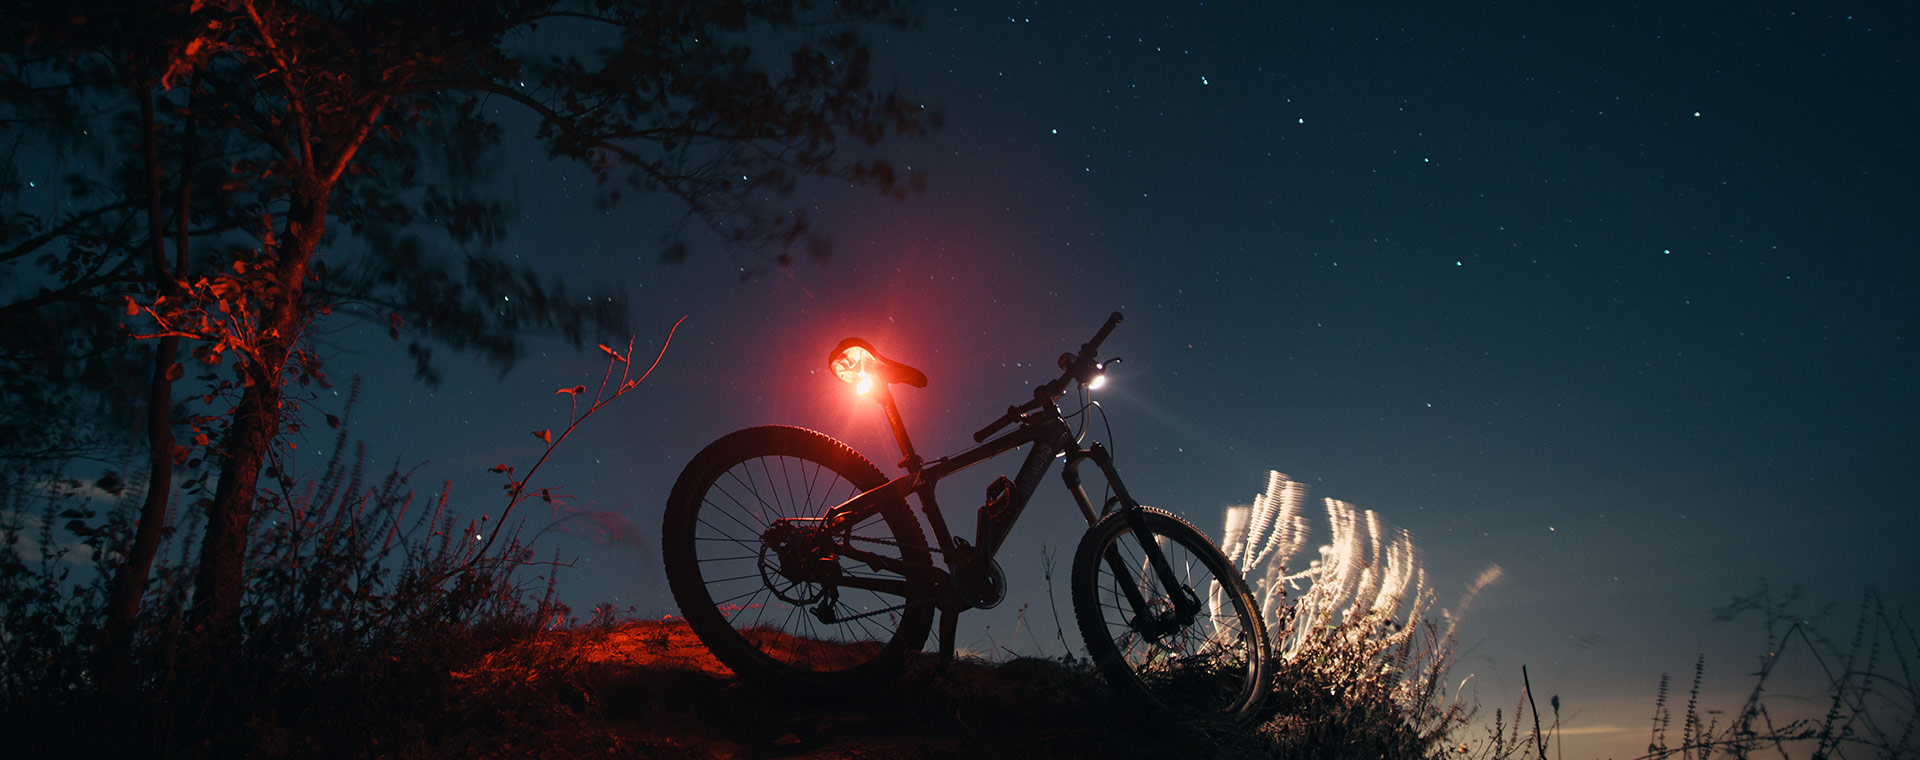 Bike at night with bright lights - titel for MonkeyLink components with FIDLOCK interface